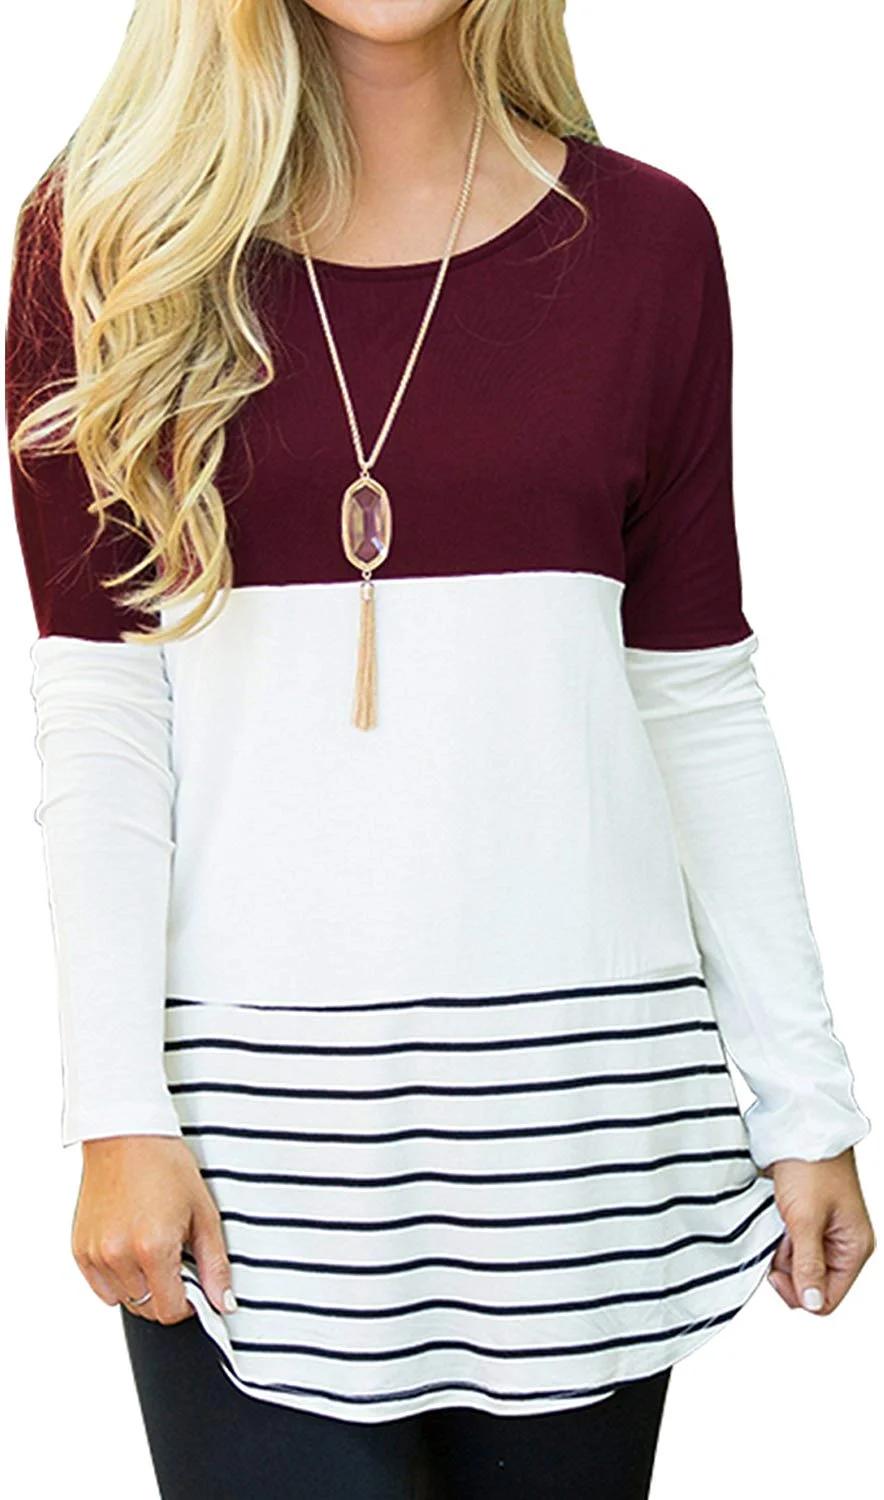 Women's Casual Color Block Lace Inset Long Sleeve T Shirt Tunic Tops